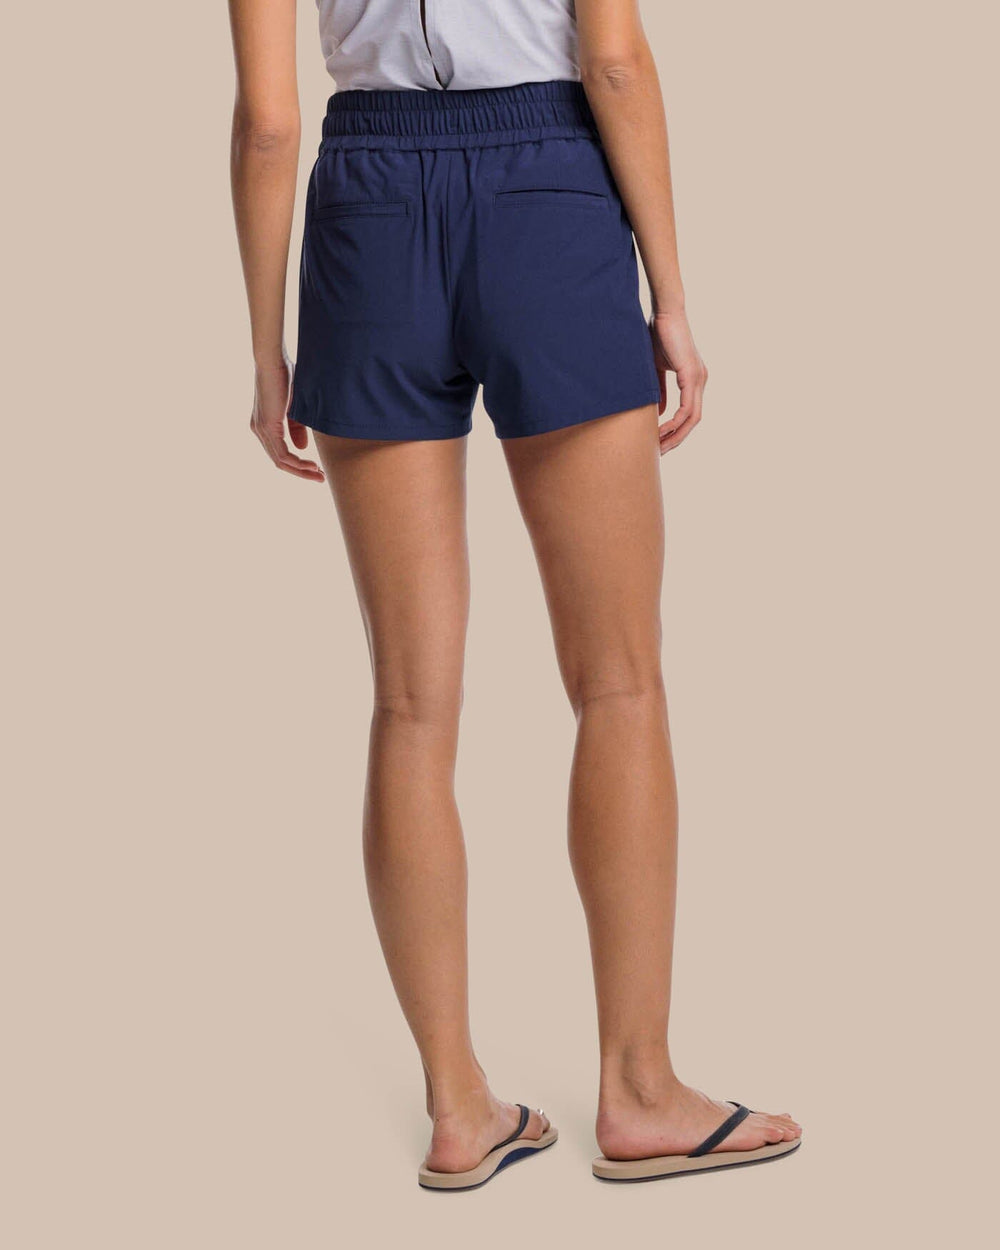 The back view of the Southern Tide Neeley brrr Performance Short by Southern Tide - Nautical Navy